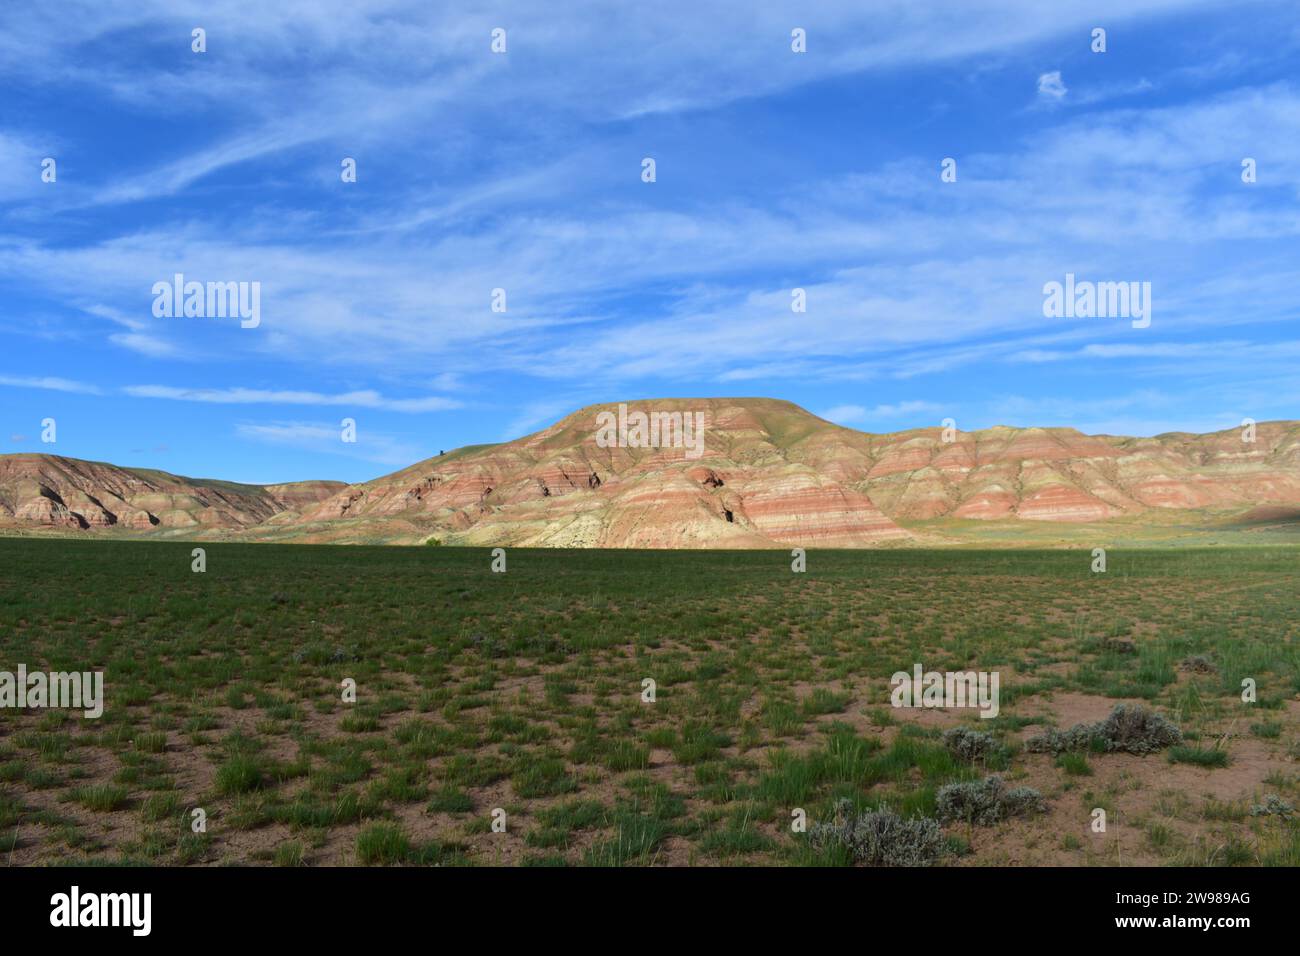 View of the colorful sedimentary sandstone mountains in the west of the Wind River Indian Reservation next to Highway 26 in Wyoming Stock Photo